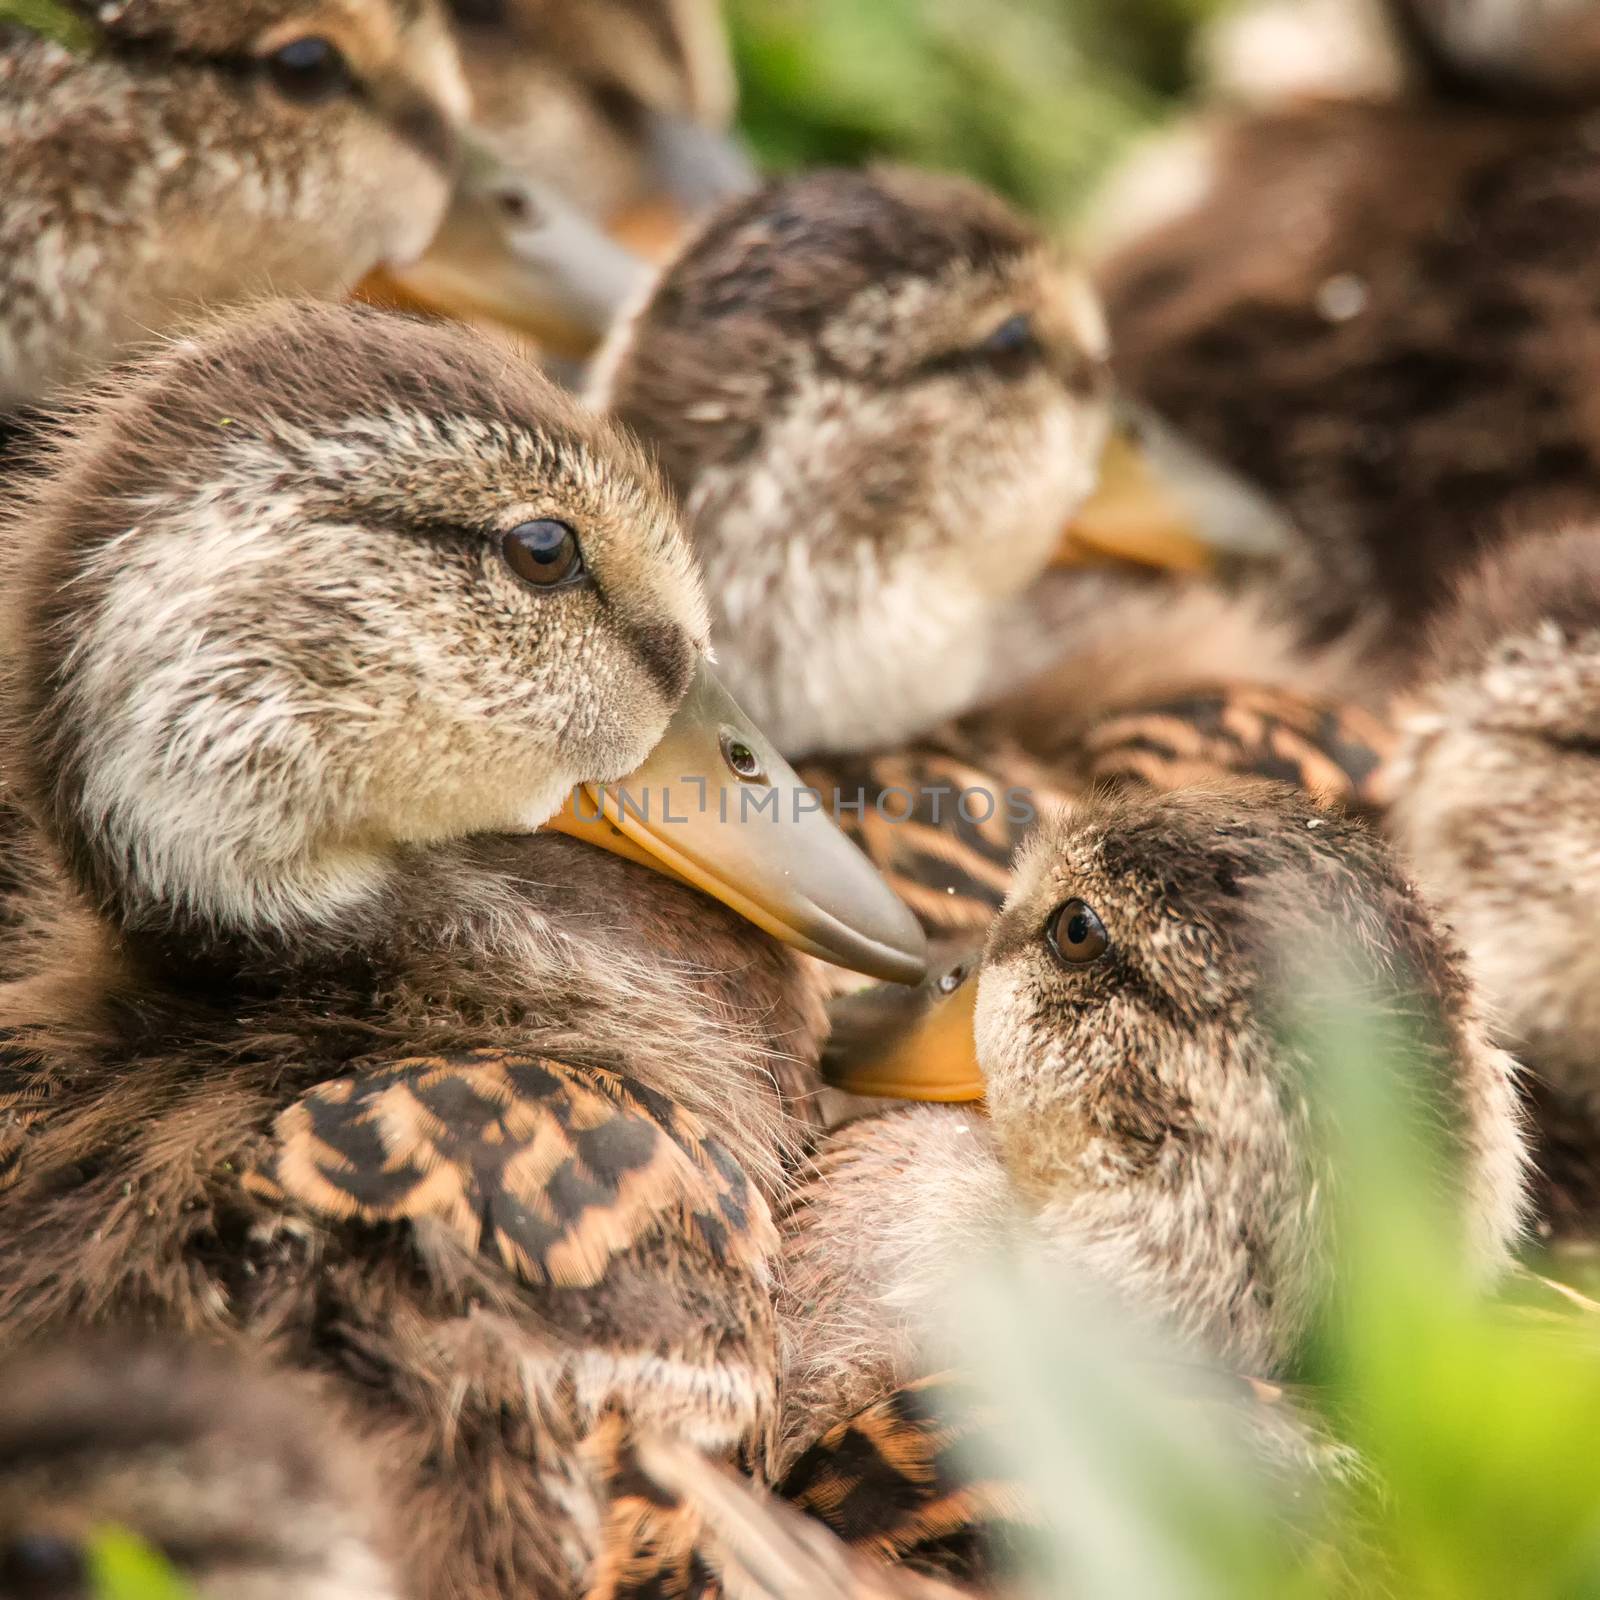 Several Ducklings Huddled Together by backyard_photography